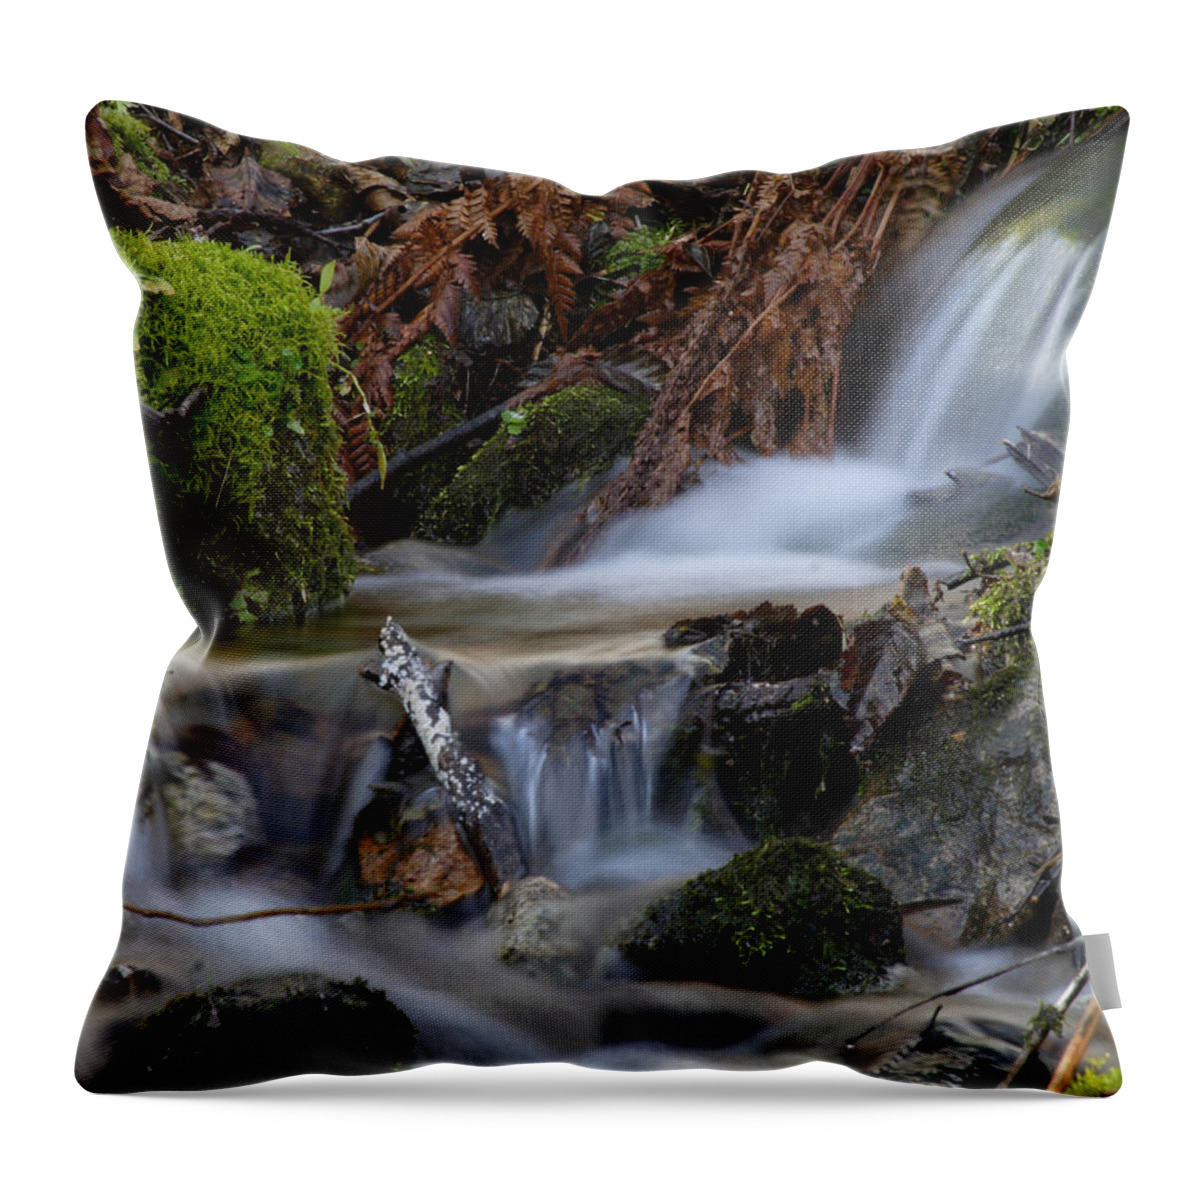 Doug Lloyd Throw Pillow featuring the photograph Slow Water by Doug Lloyd